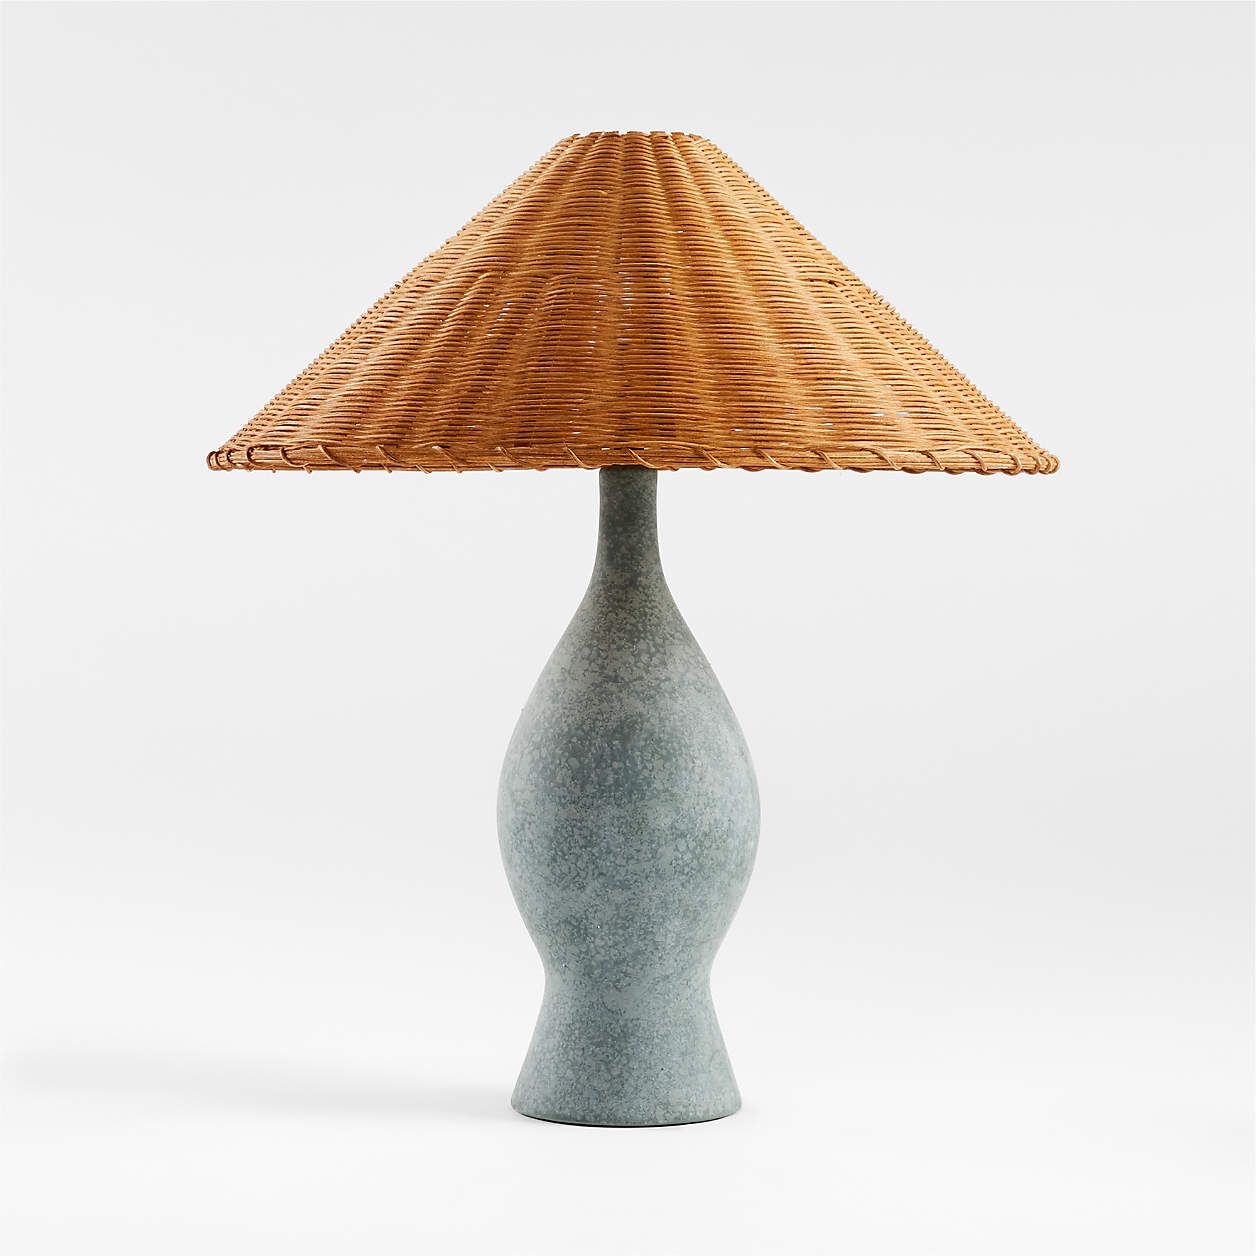 Courbe Green Ceramic Table Lamp with Rattan Shade by Athena Calderone